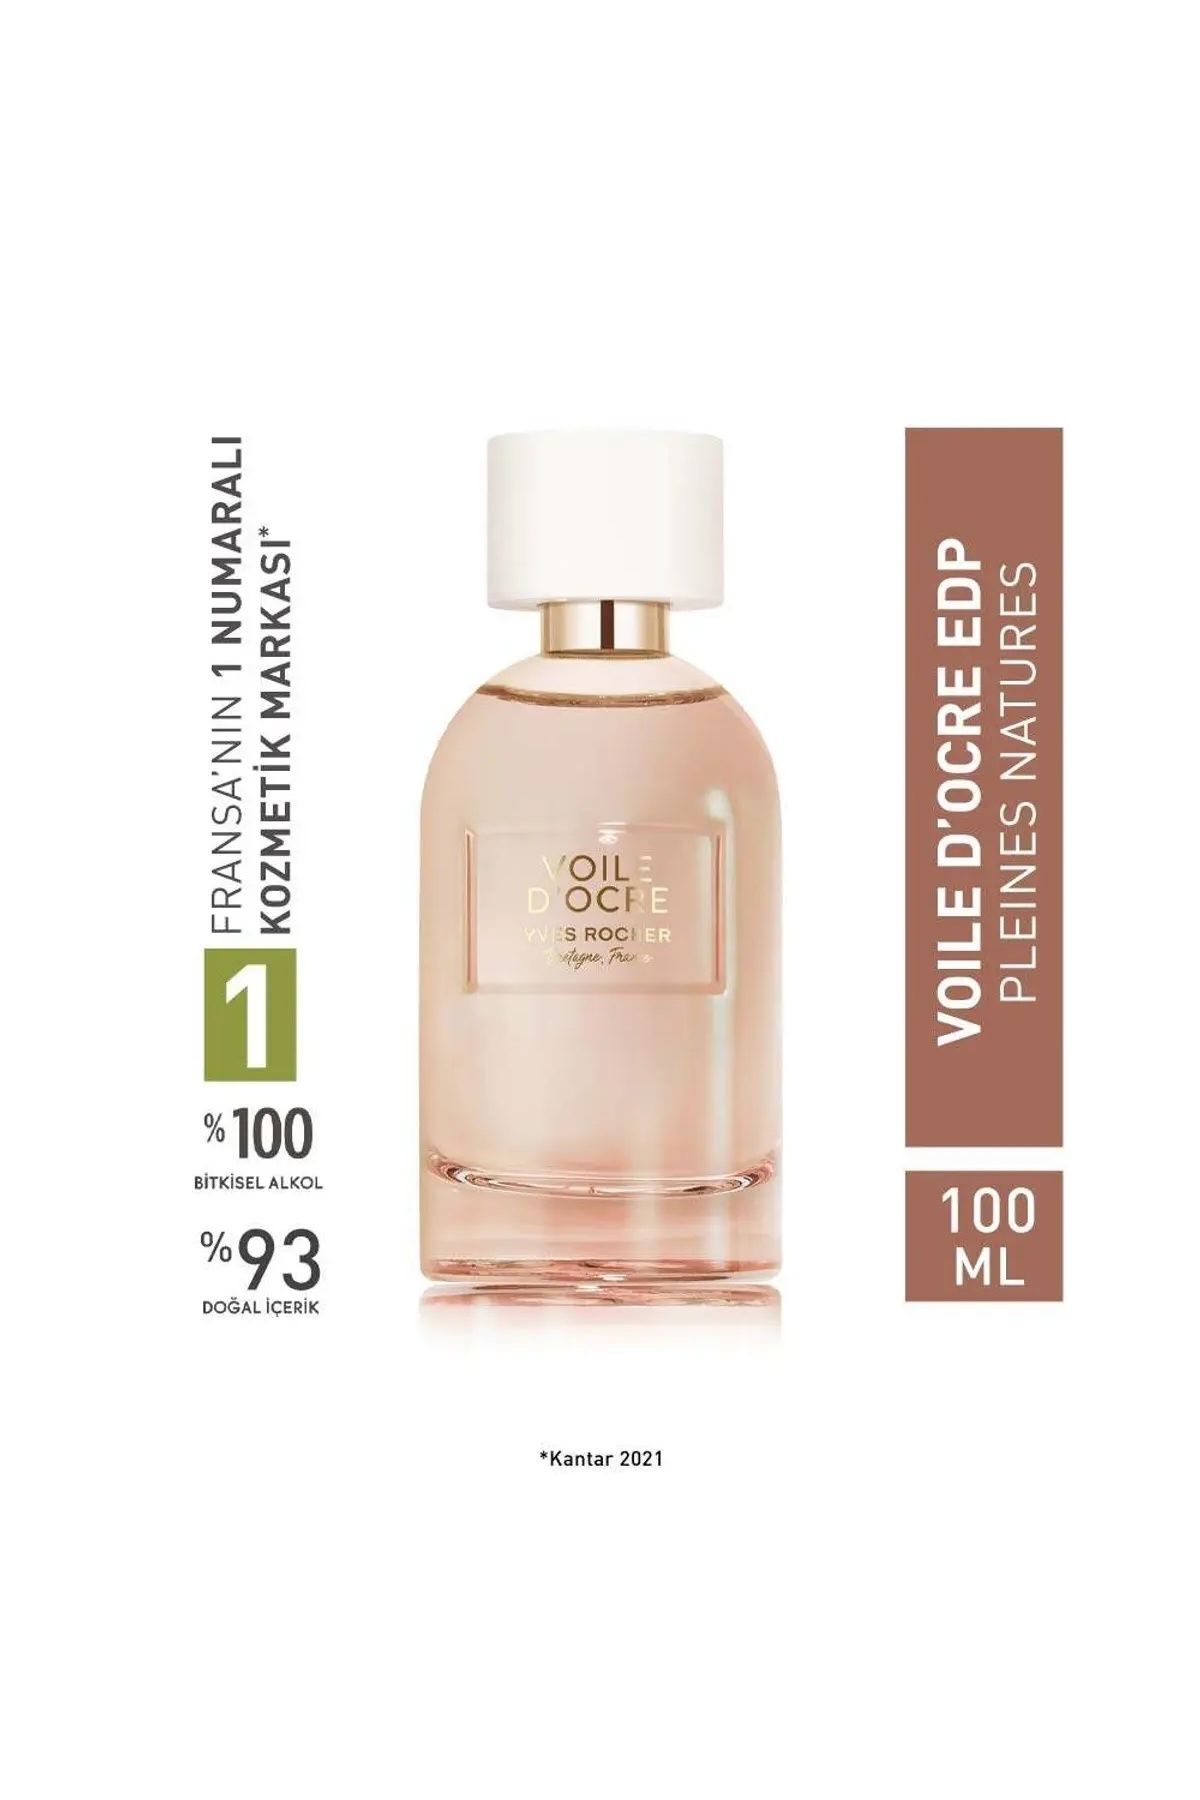 Yves Rocher Voile Docre Edp-pleines Natures-100 ml